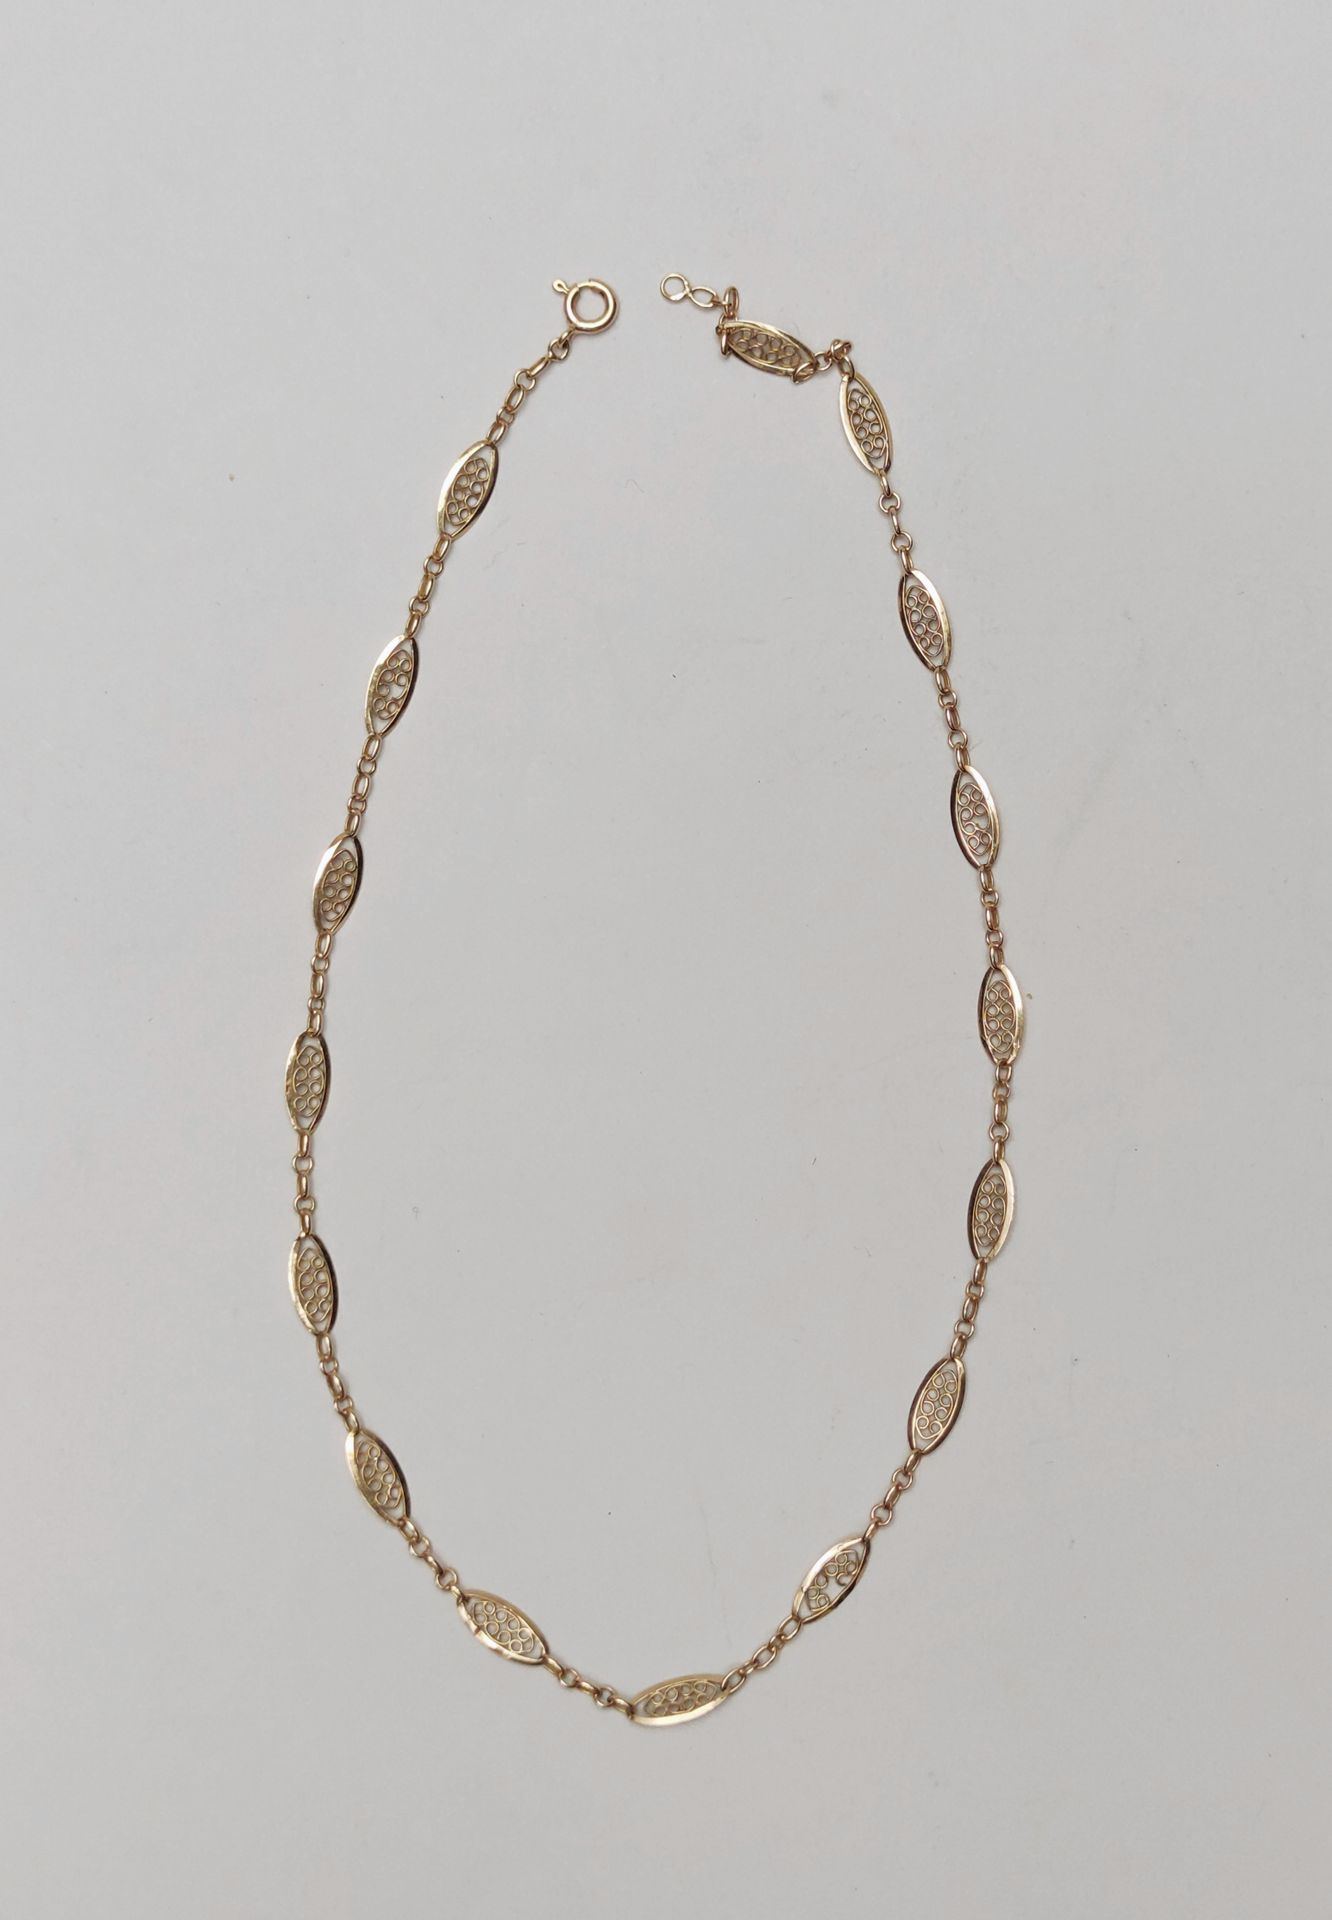 Null Necklace in yellow gold 750°/00 with 16 oval links 

weight : 4.9 g